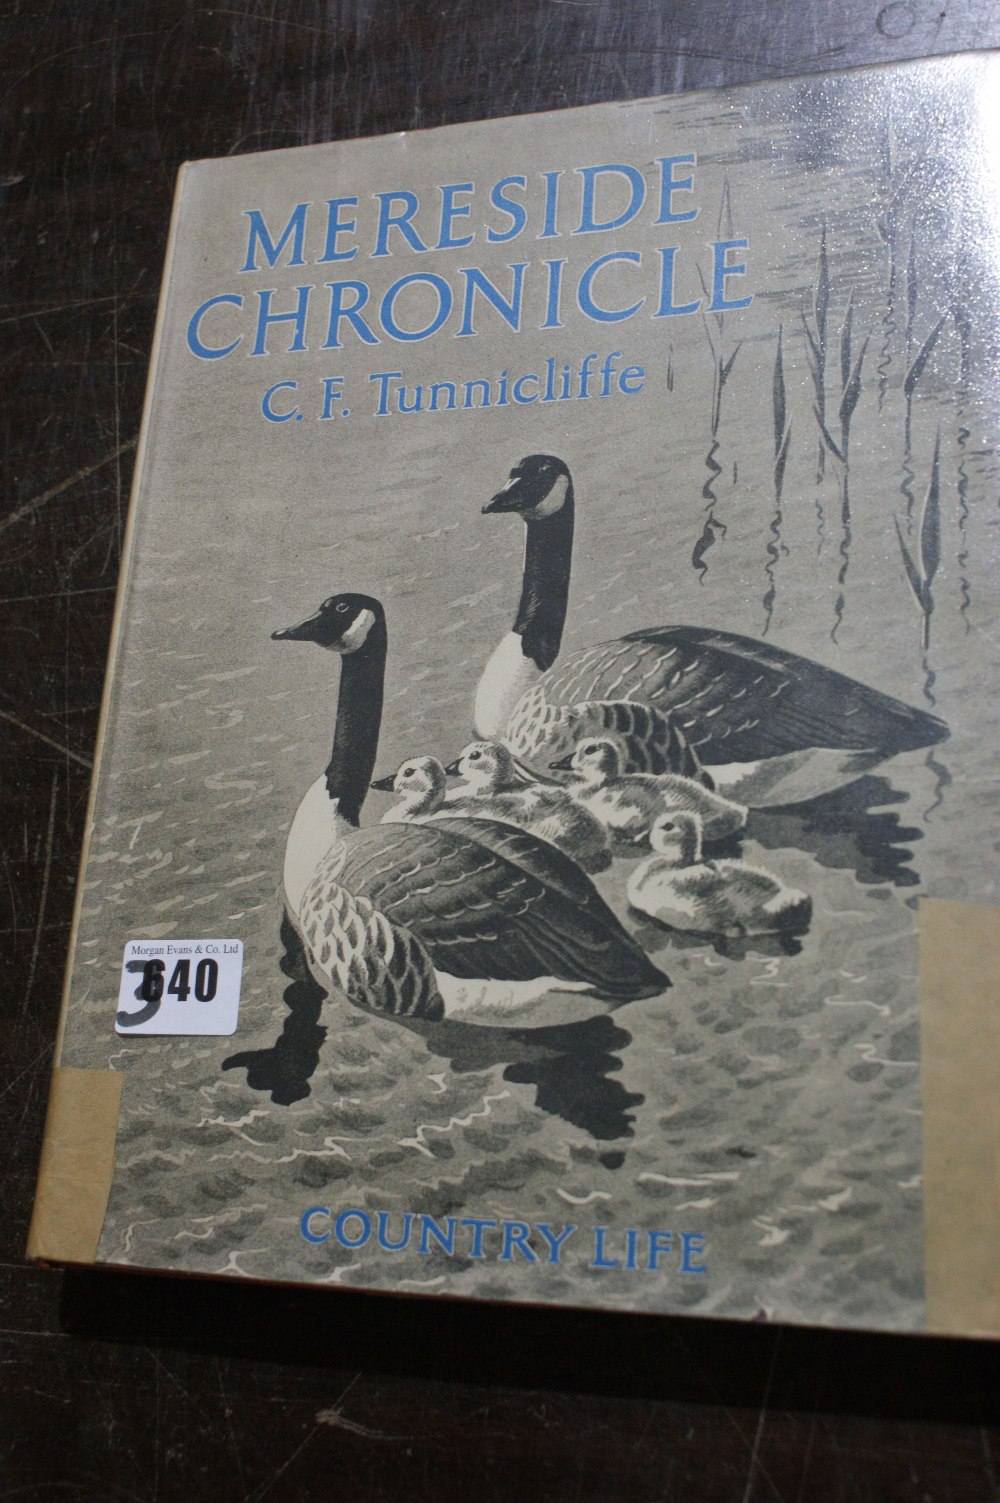 Near Side Chronicle"" By C F Tunnicliffe, First Edition 1948